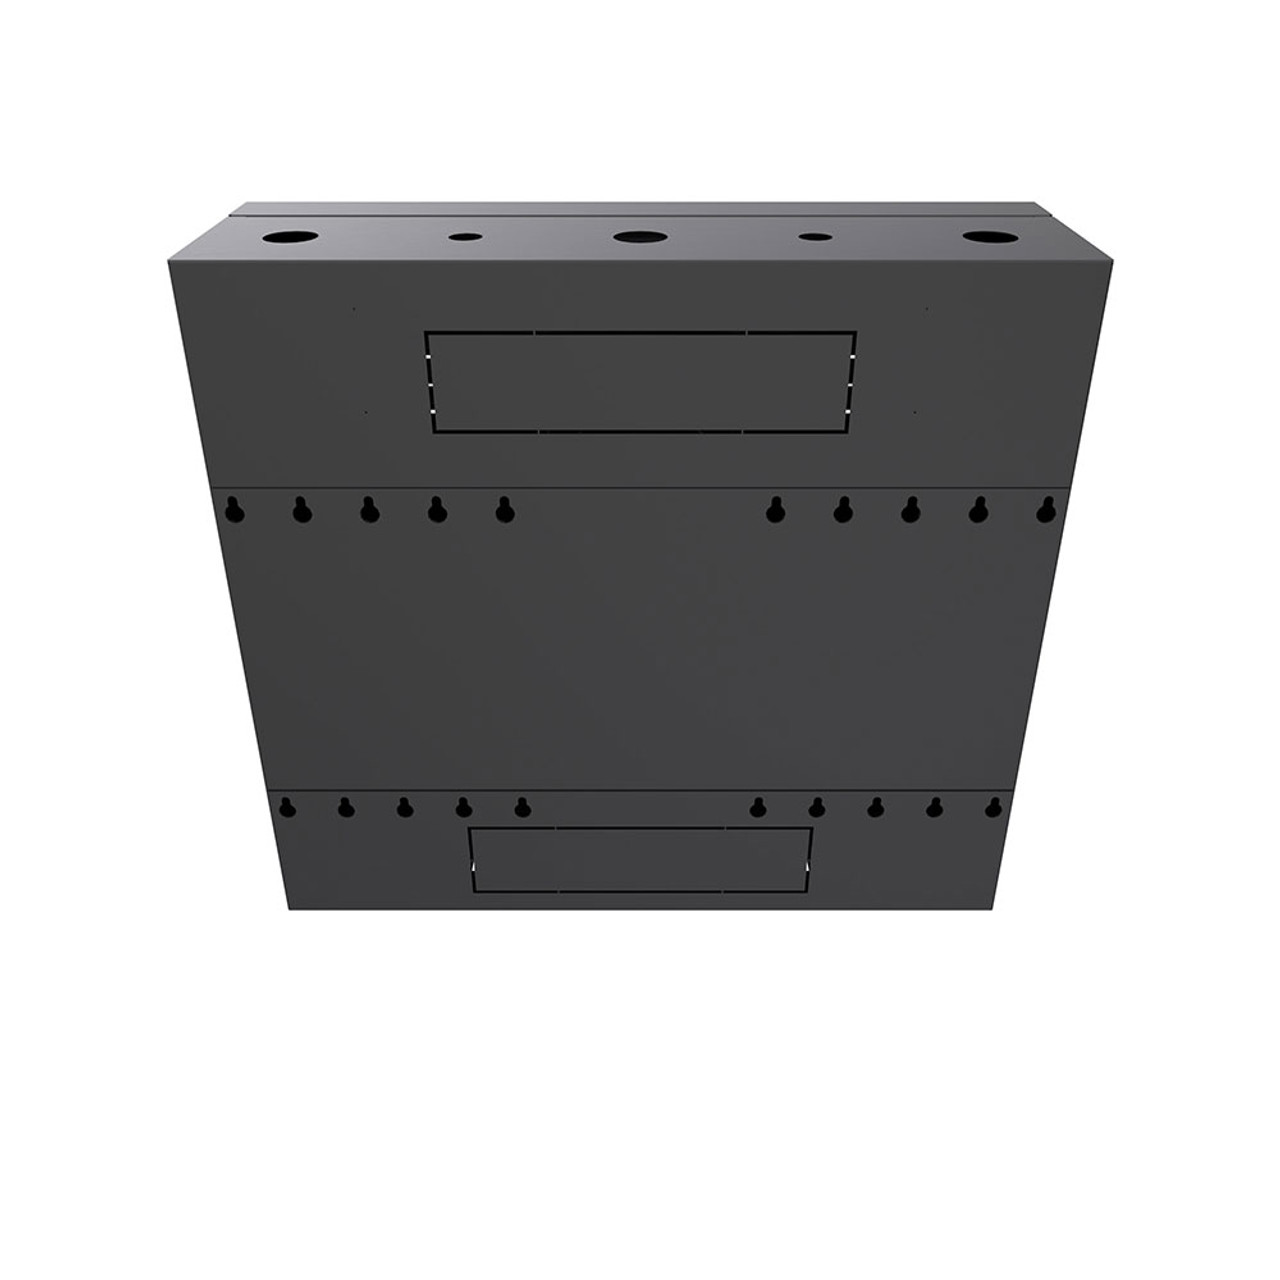 4U Vertical Wall Mount Enclosure, 12.7 inch (325mm) to 15.7 inch (400mm) depth, Cold-rolled Steel, Black